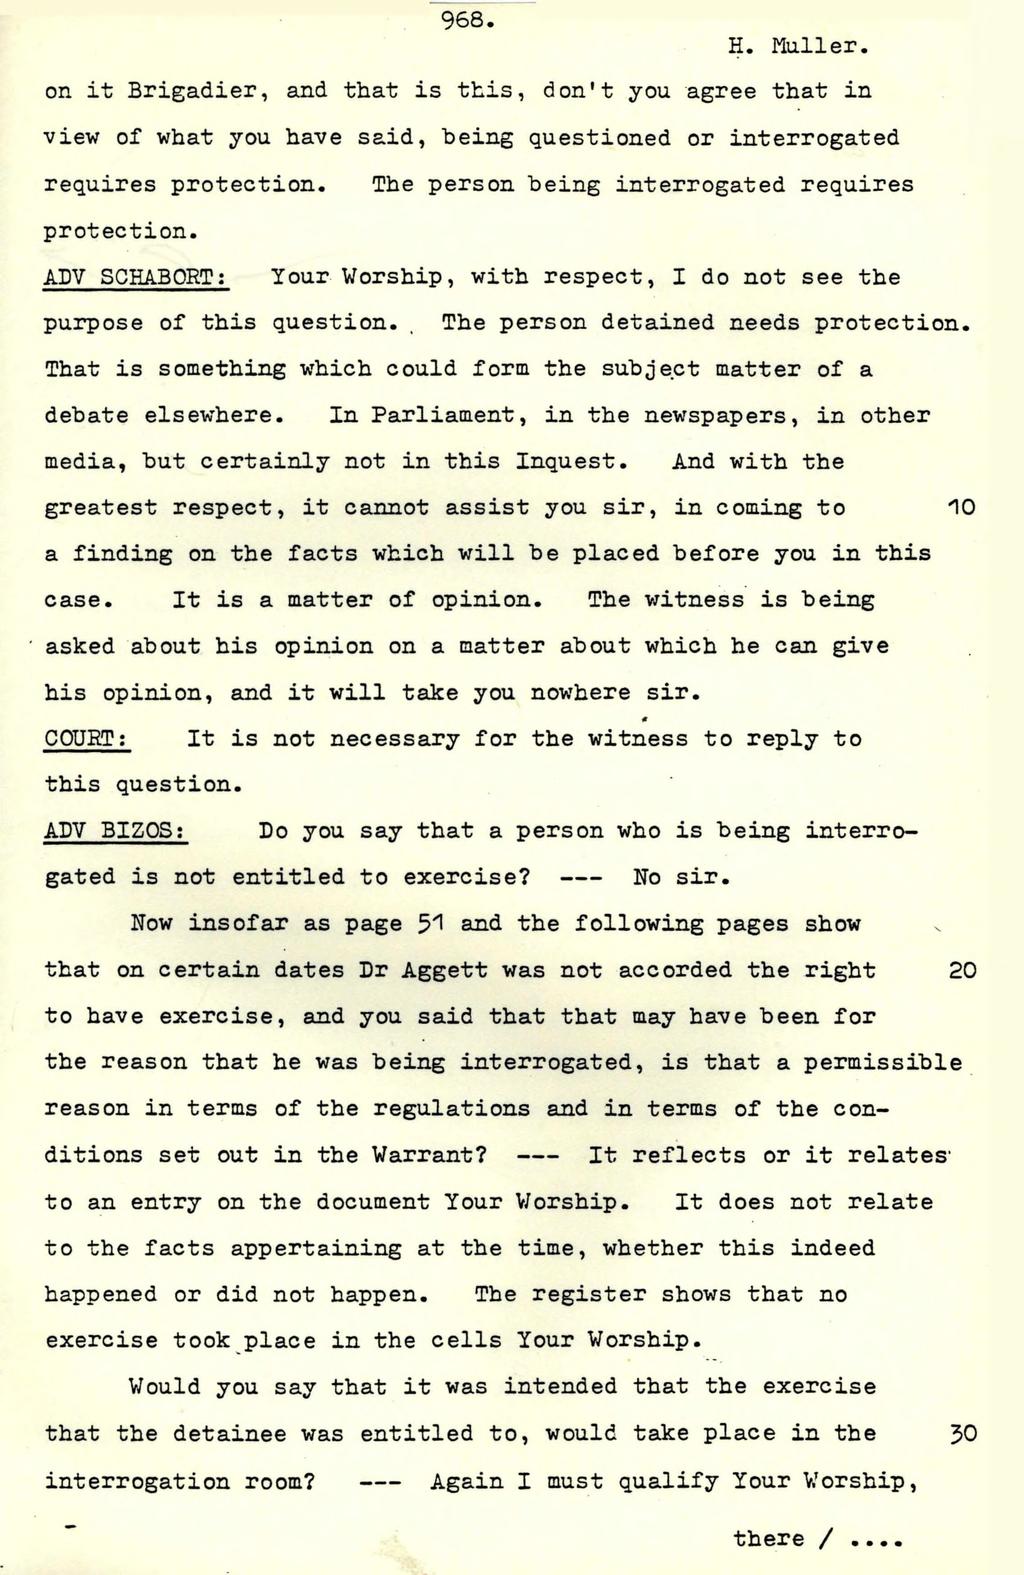 H. Muller. on it Brigadier, and that is this, don't you agree that in view of what you have said, being questioned or interrogated requires protection.